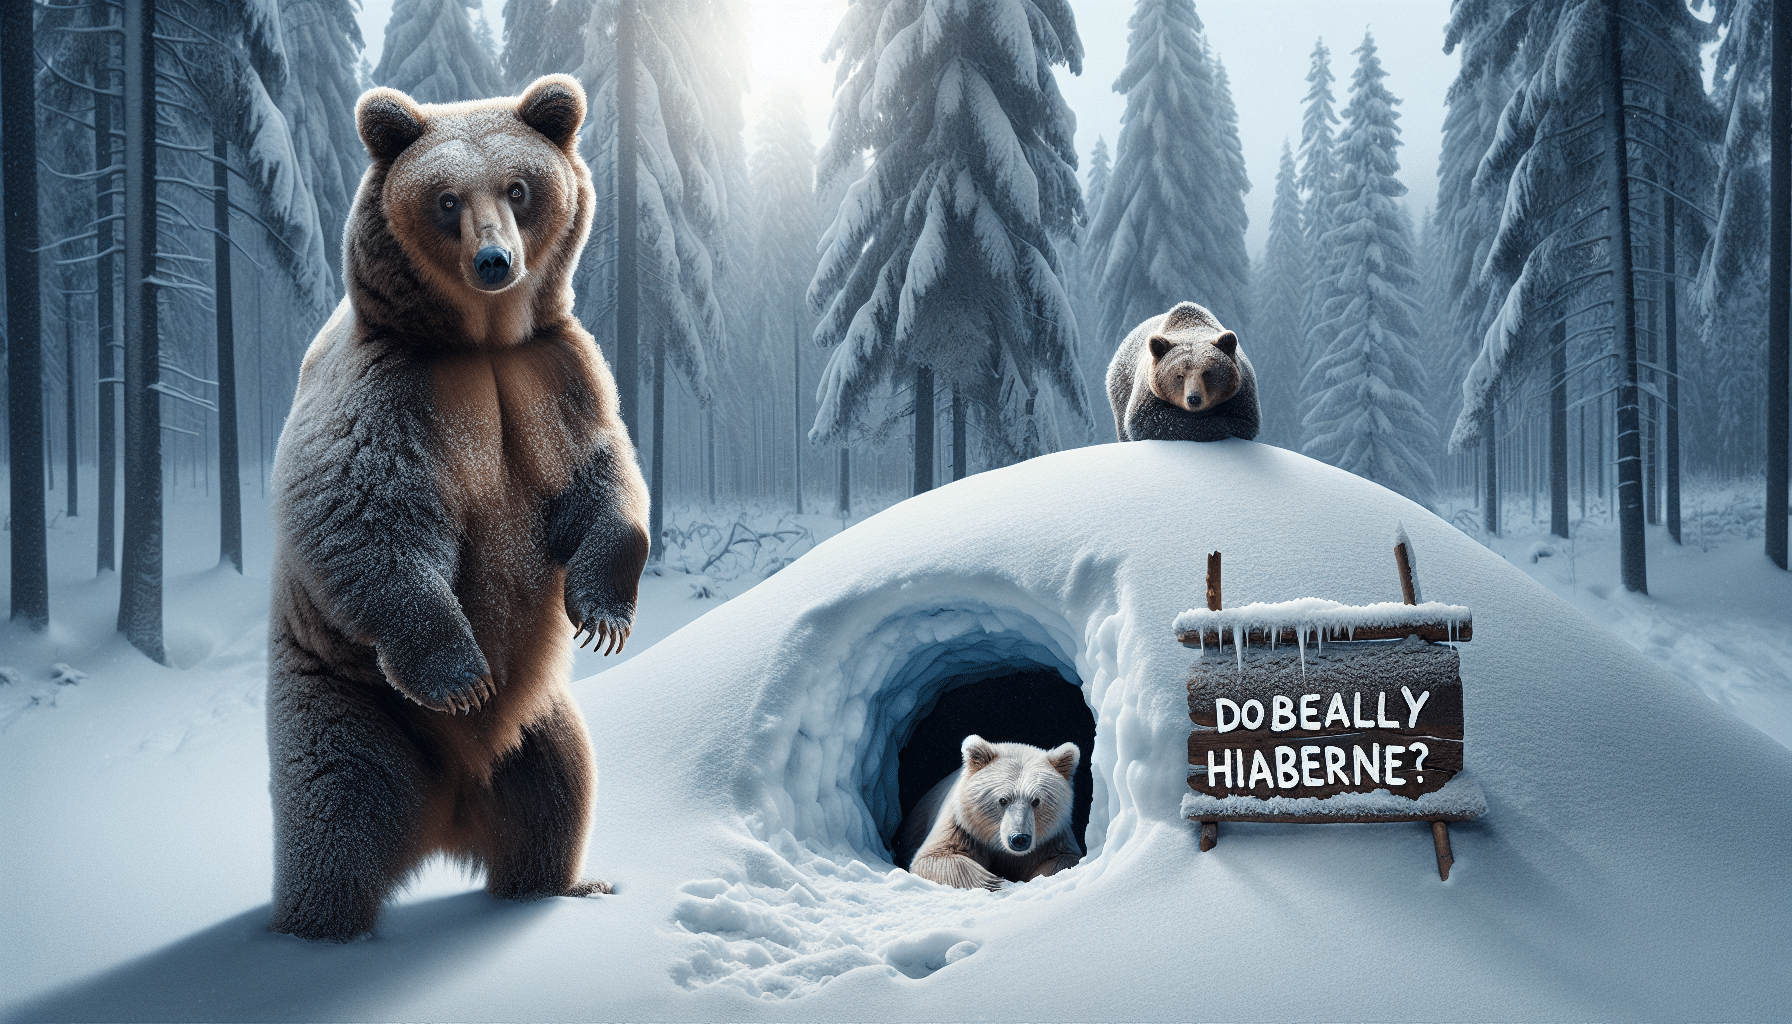 Create an image that visually explores the question 'Do bears really hibernate?' without using text or humans. The scene should include a large, healthy brown bear in the foreground, awake and curious in the midst of a snow-covered forest, its paw pressed on the entrance of a snow-capped den. Nearby, another bear stands, looking sleepy and ready to enter another den. The cold winter scenery should convincingly represent the toughness of the season. The image should be realistic, devoid of brand names or logos, anthropomorphic elements, or any form of text.